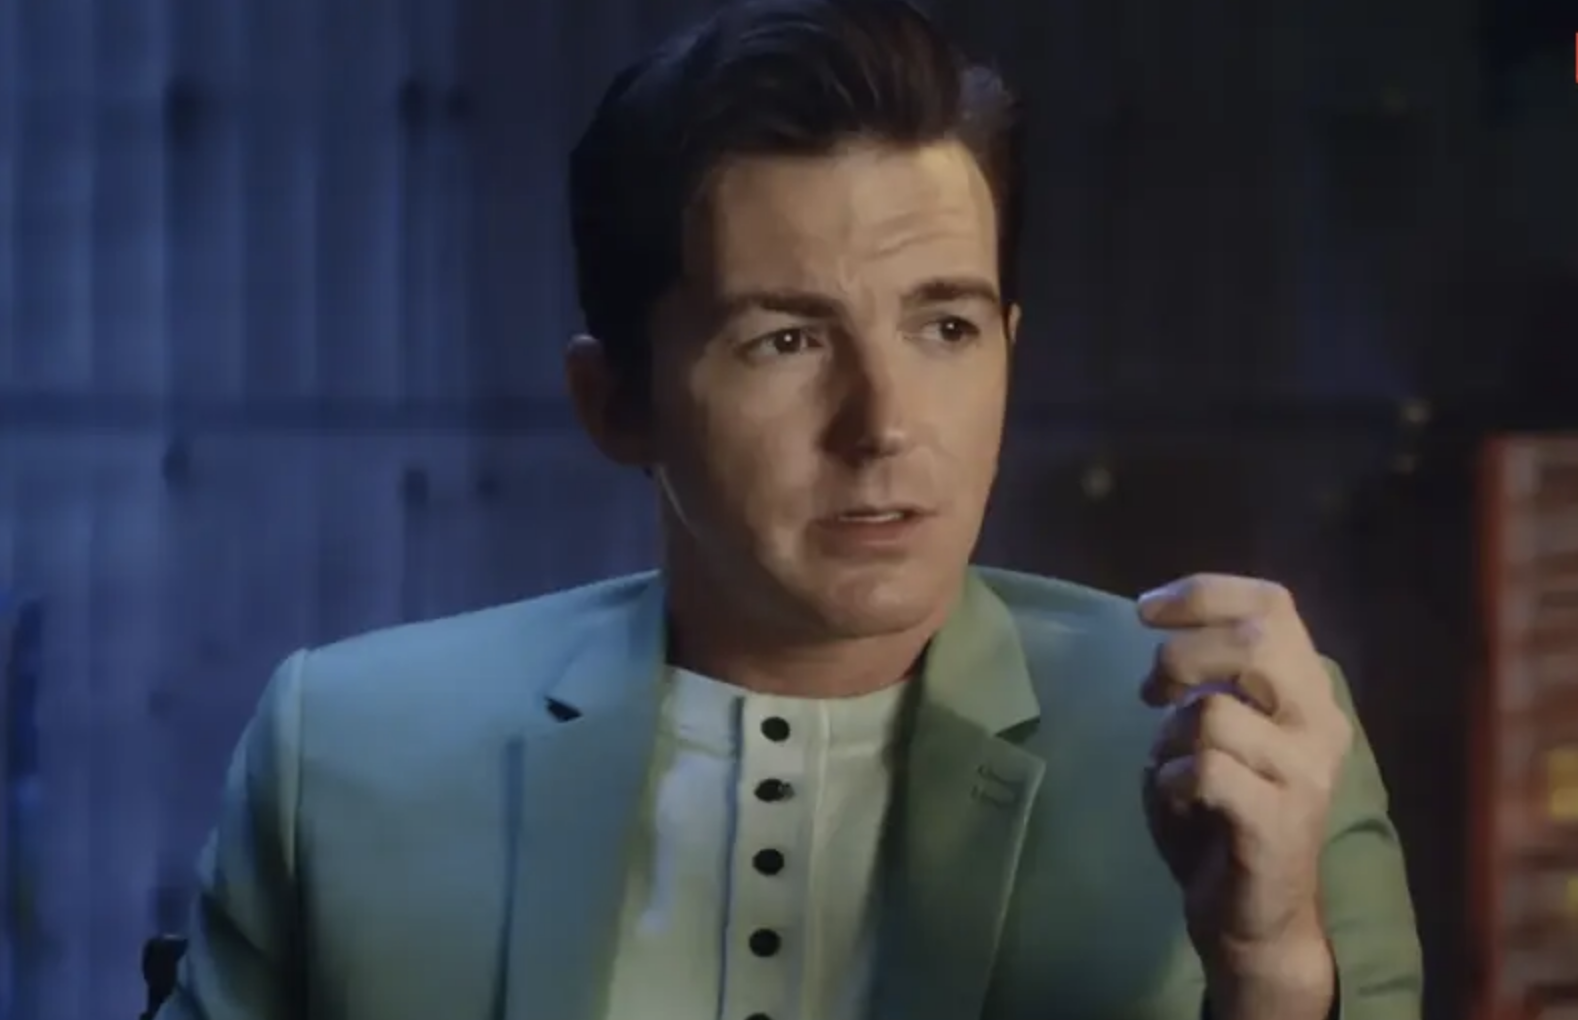 Drake Bell in a suit speaks during the docuseries